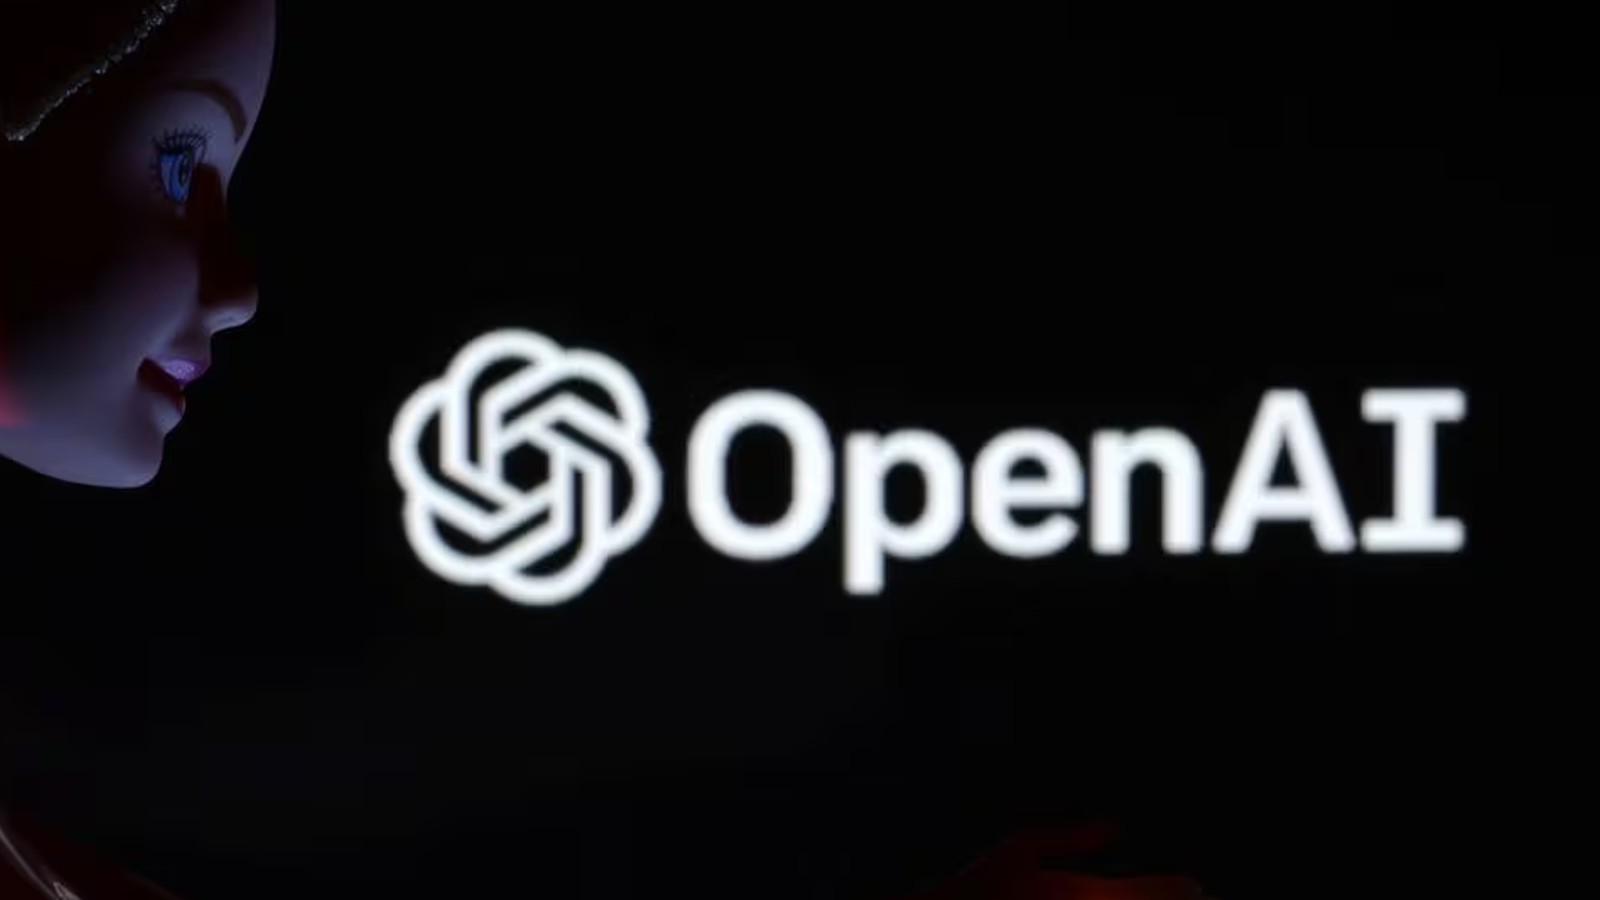 Jan Leike’s departure from OpenAI: Reflections on safety, responsibility and ethical implications in AI development